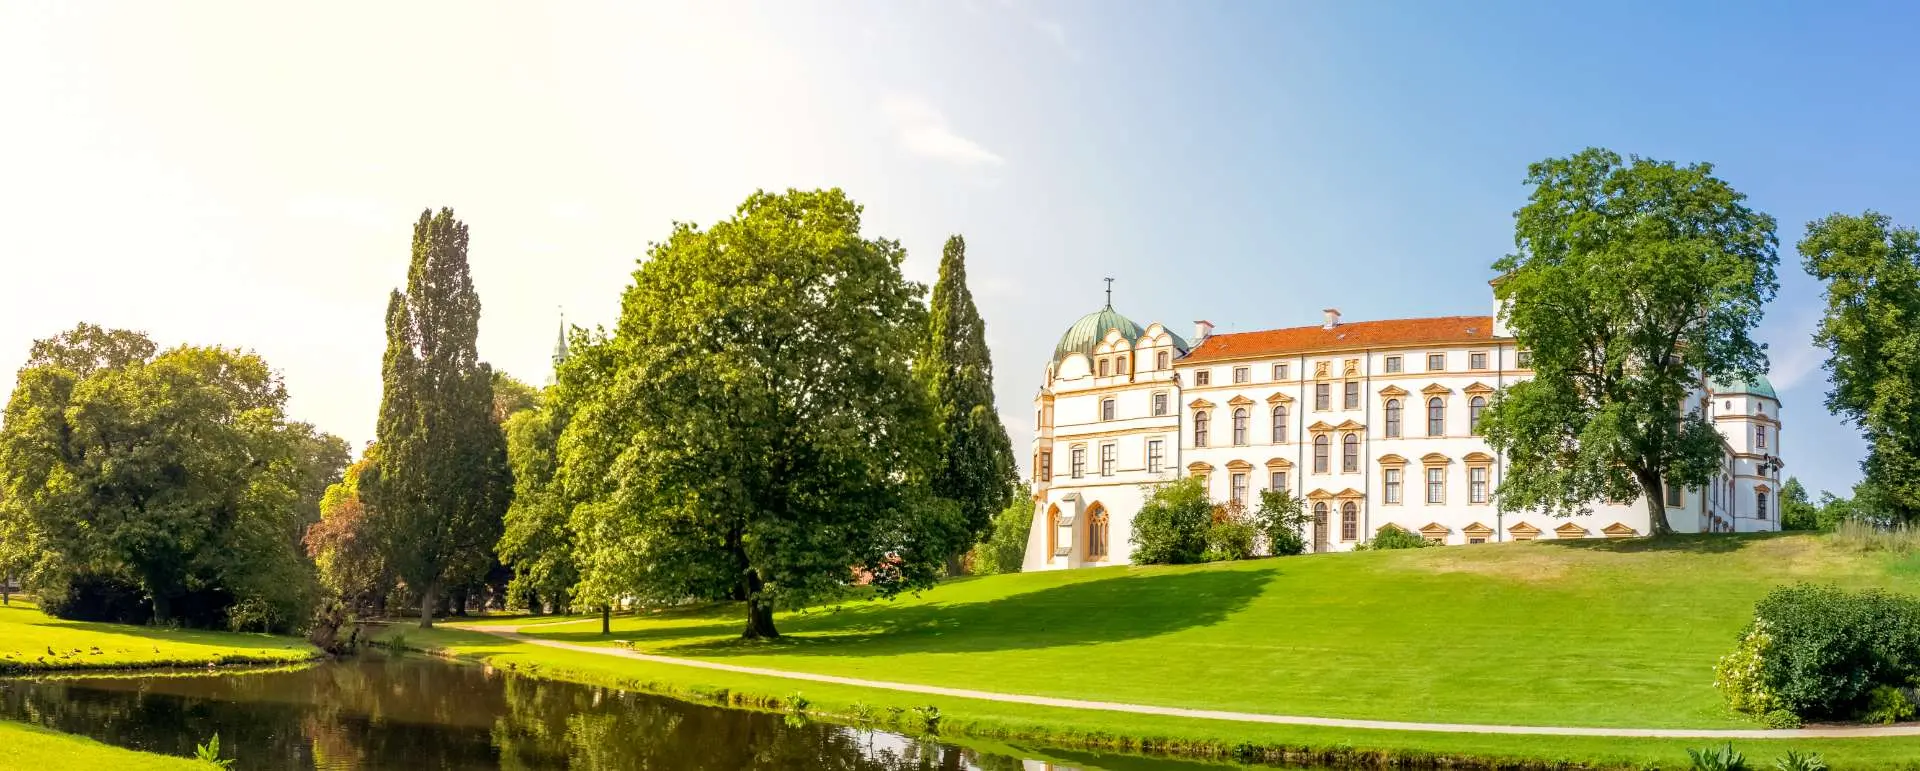 Lower Saxony - the destination with large hotels